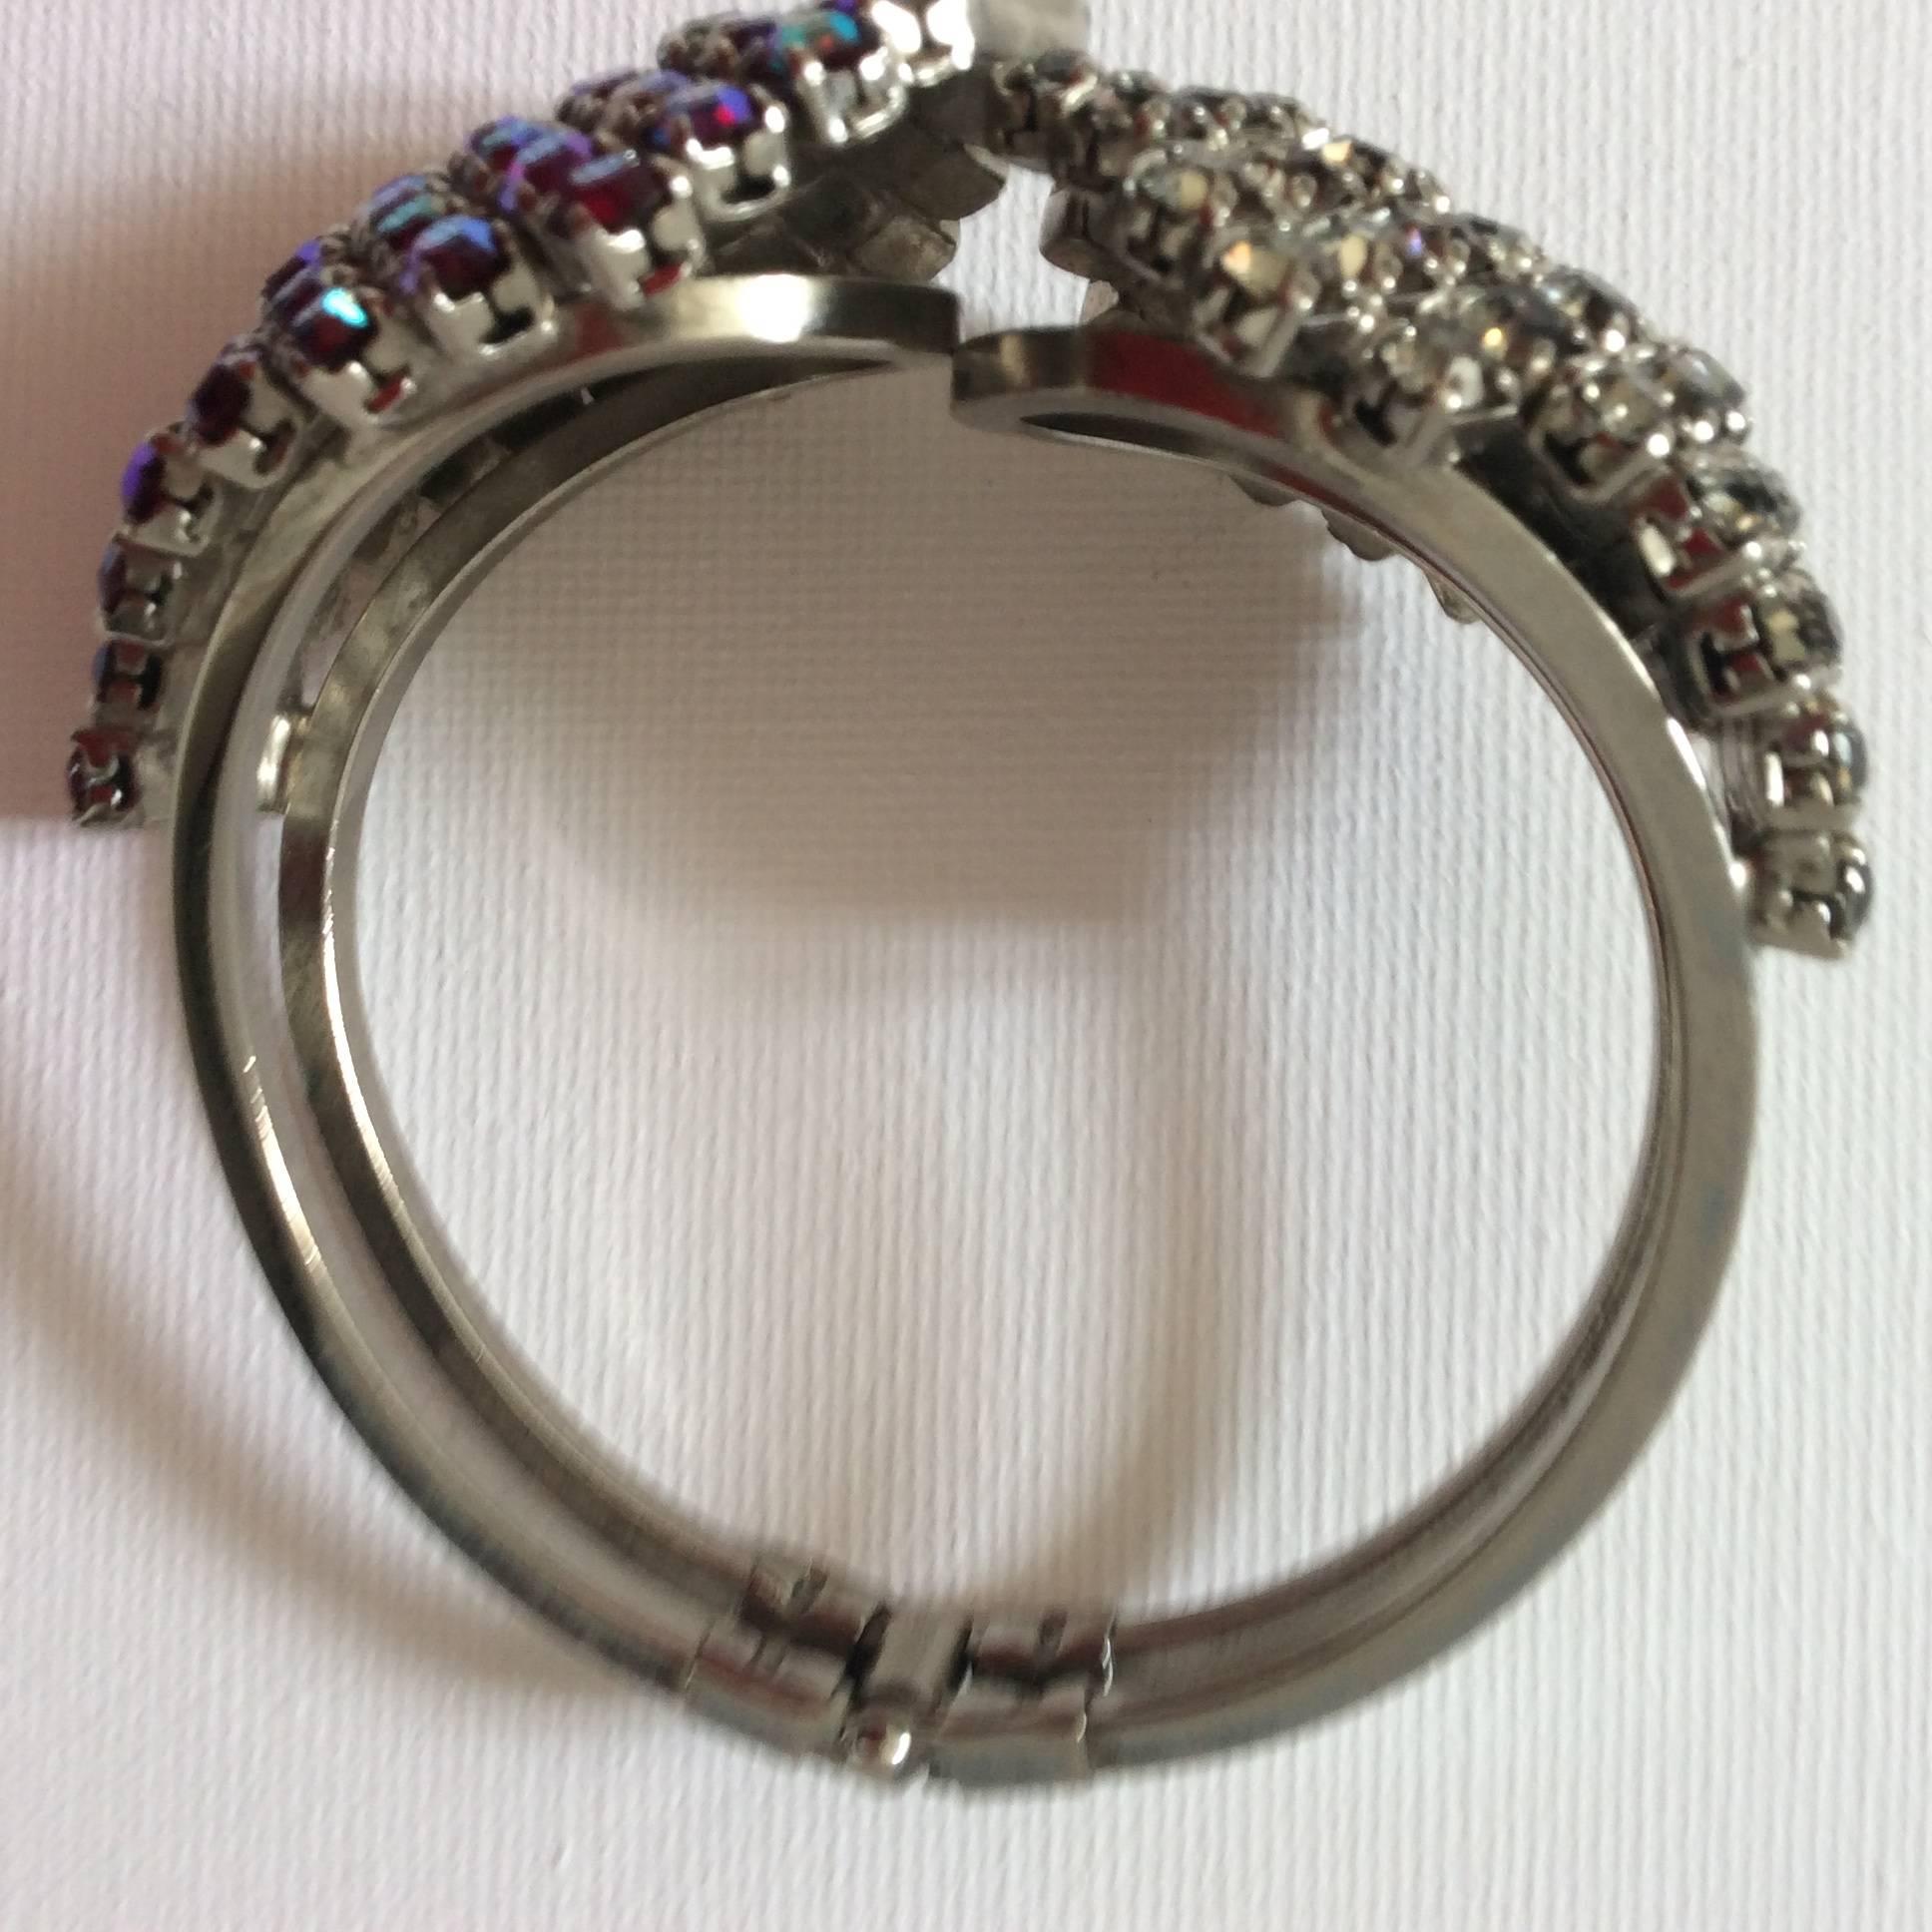 Presented here is a gorgeous Juliana clamper bracelet from the 1960's. The bracelet has aurora borealis and clear rhinestones on the bracelet. The bracelet's 'clamper' closure is retractable. The bracelet opens at center of the top face of the